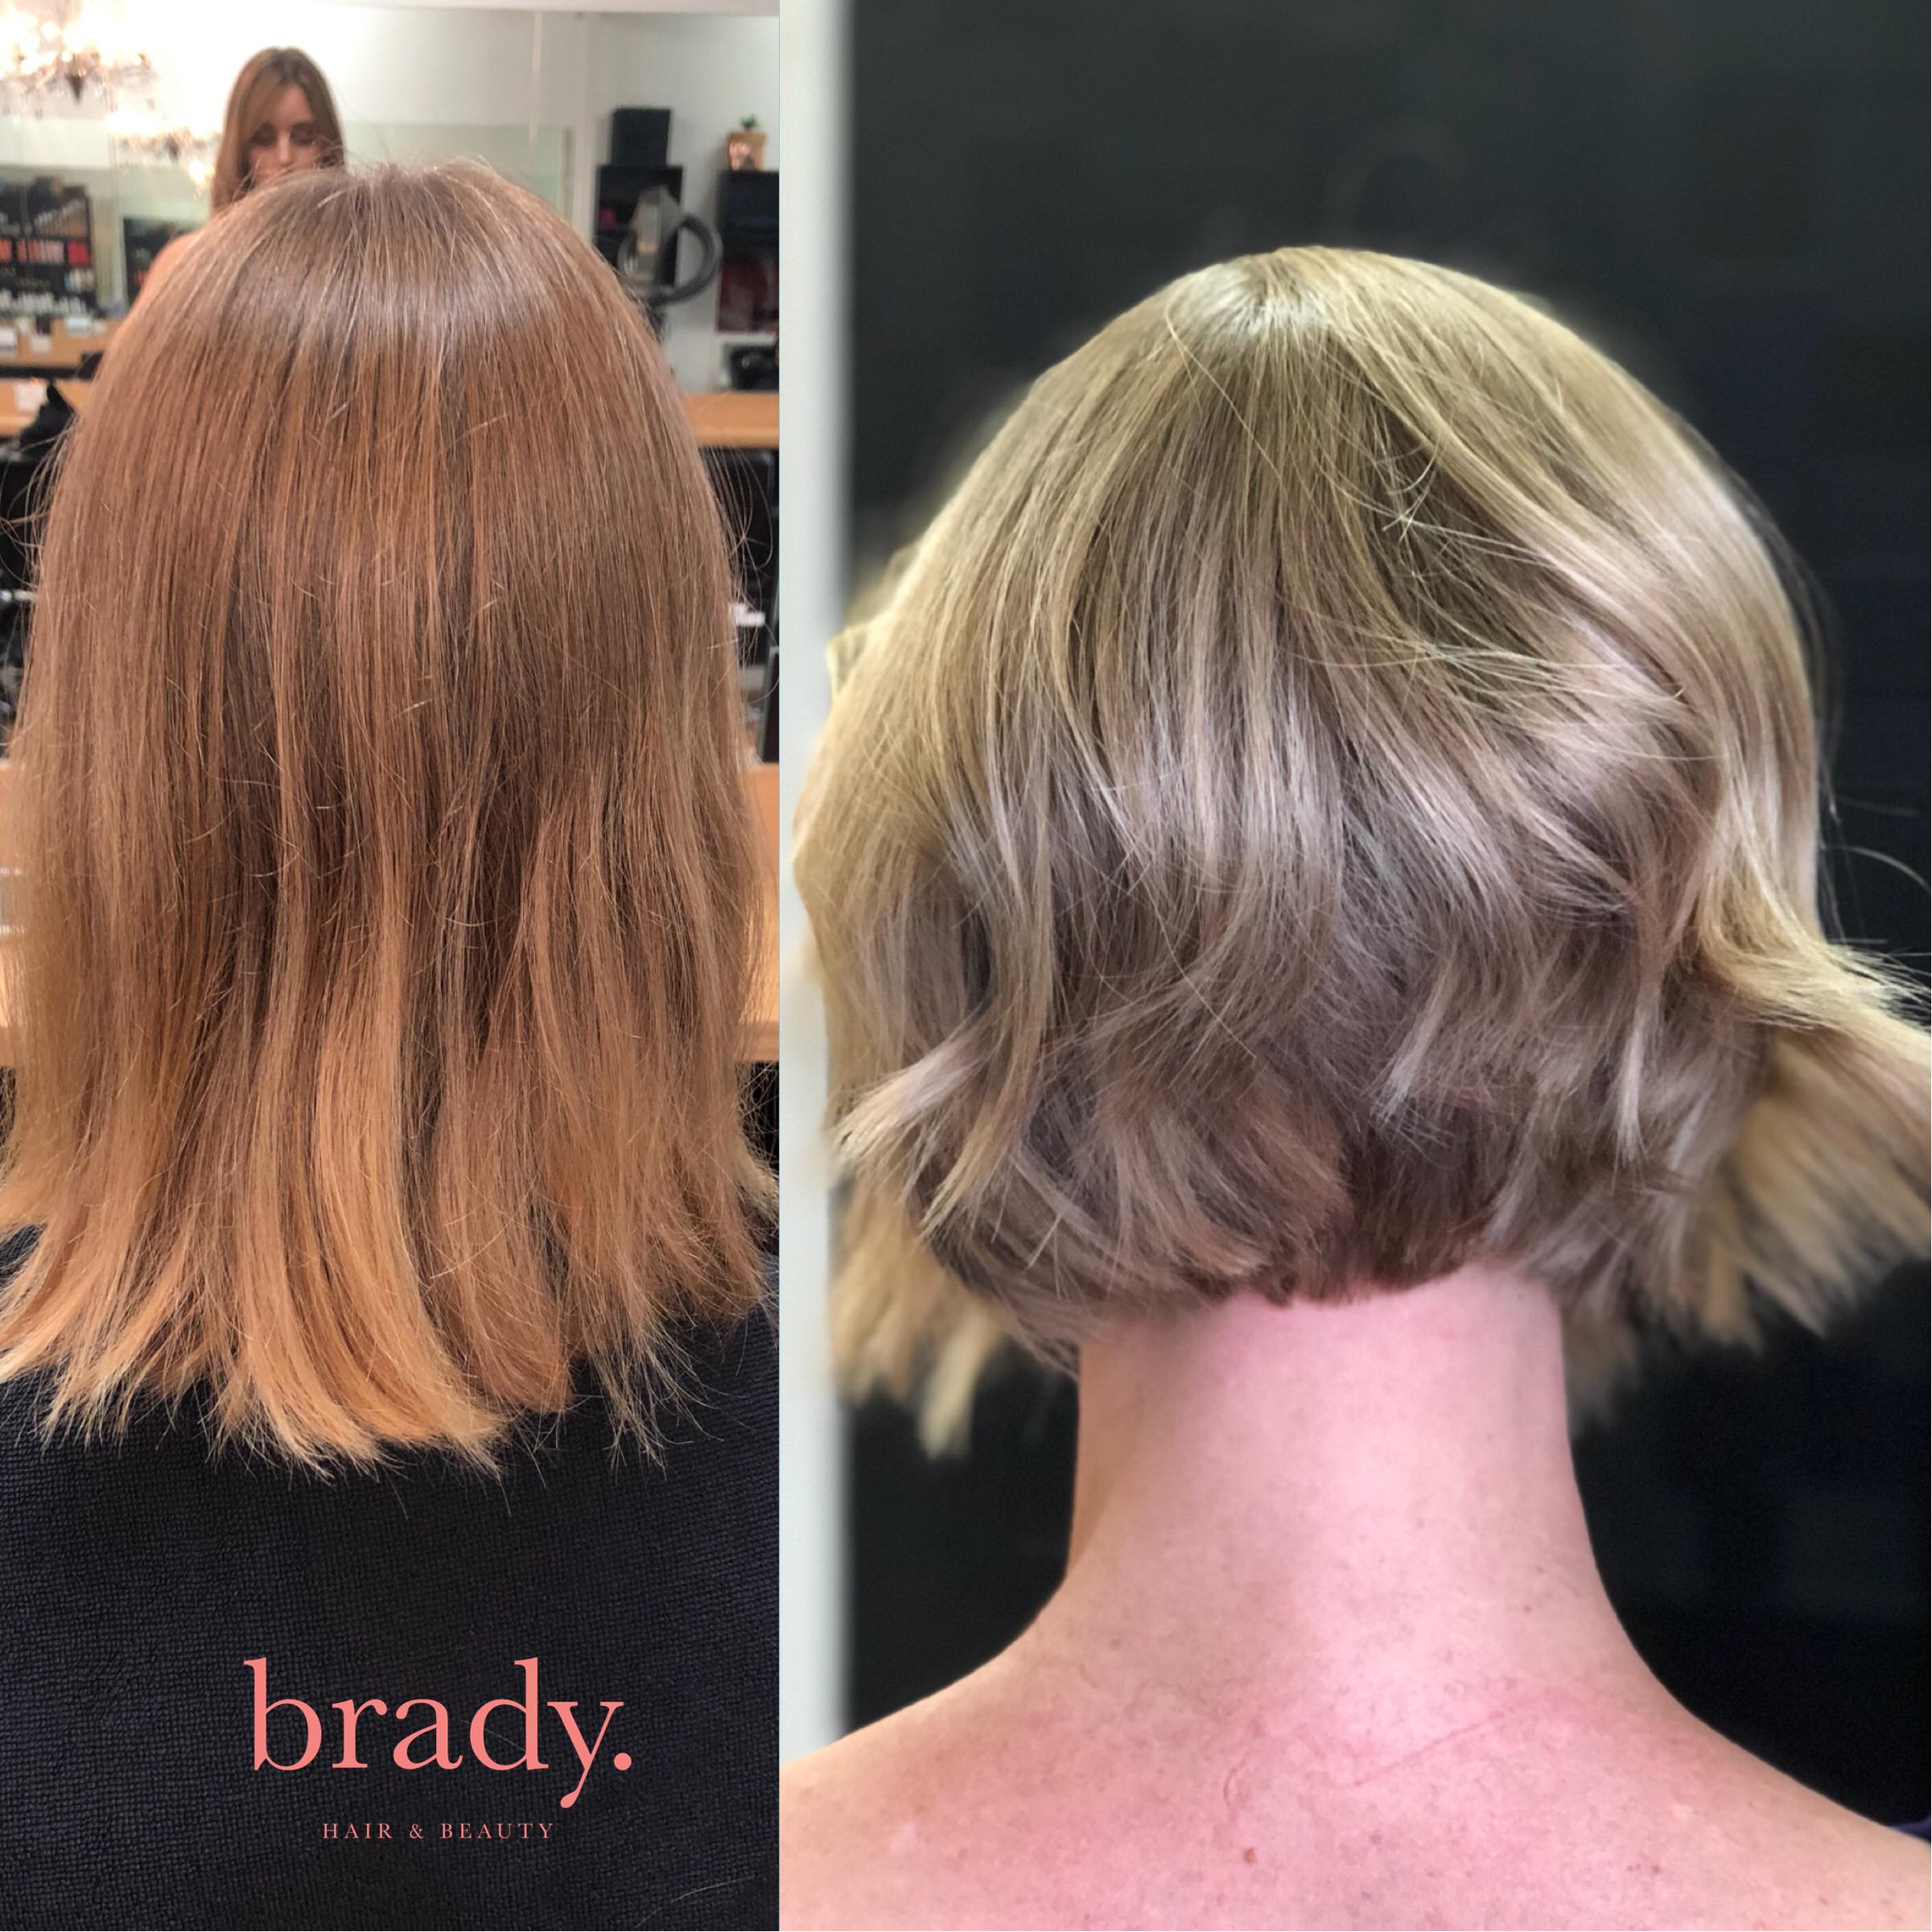  Before and after picture of hairstyle. Final result: woman with short, feminine haircut. Styled by Brady. Hair &amp; Beauty, Toowong, Brisbane. 